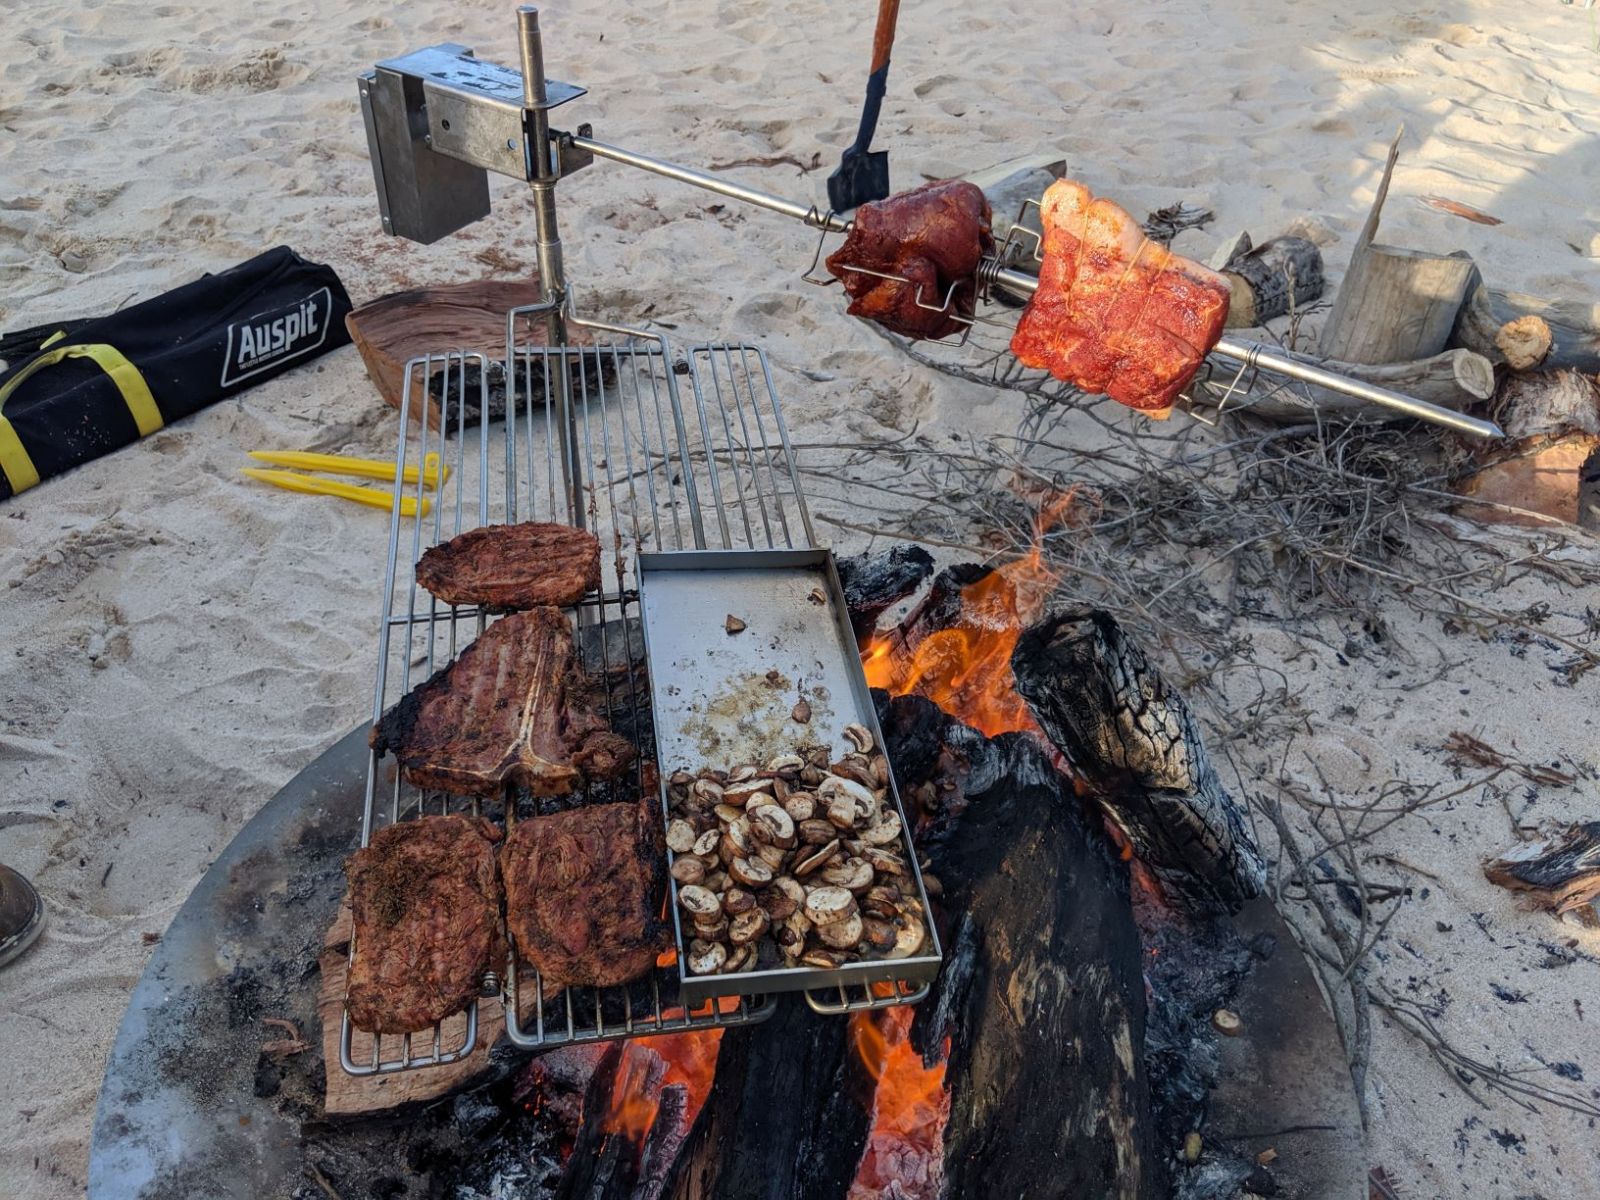 This image show the Deluxe Campfire Swinging Grill cooking steaks on the grill, mushrooms on the hotplate and a spit roast cooking over a fire while camping